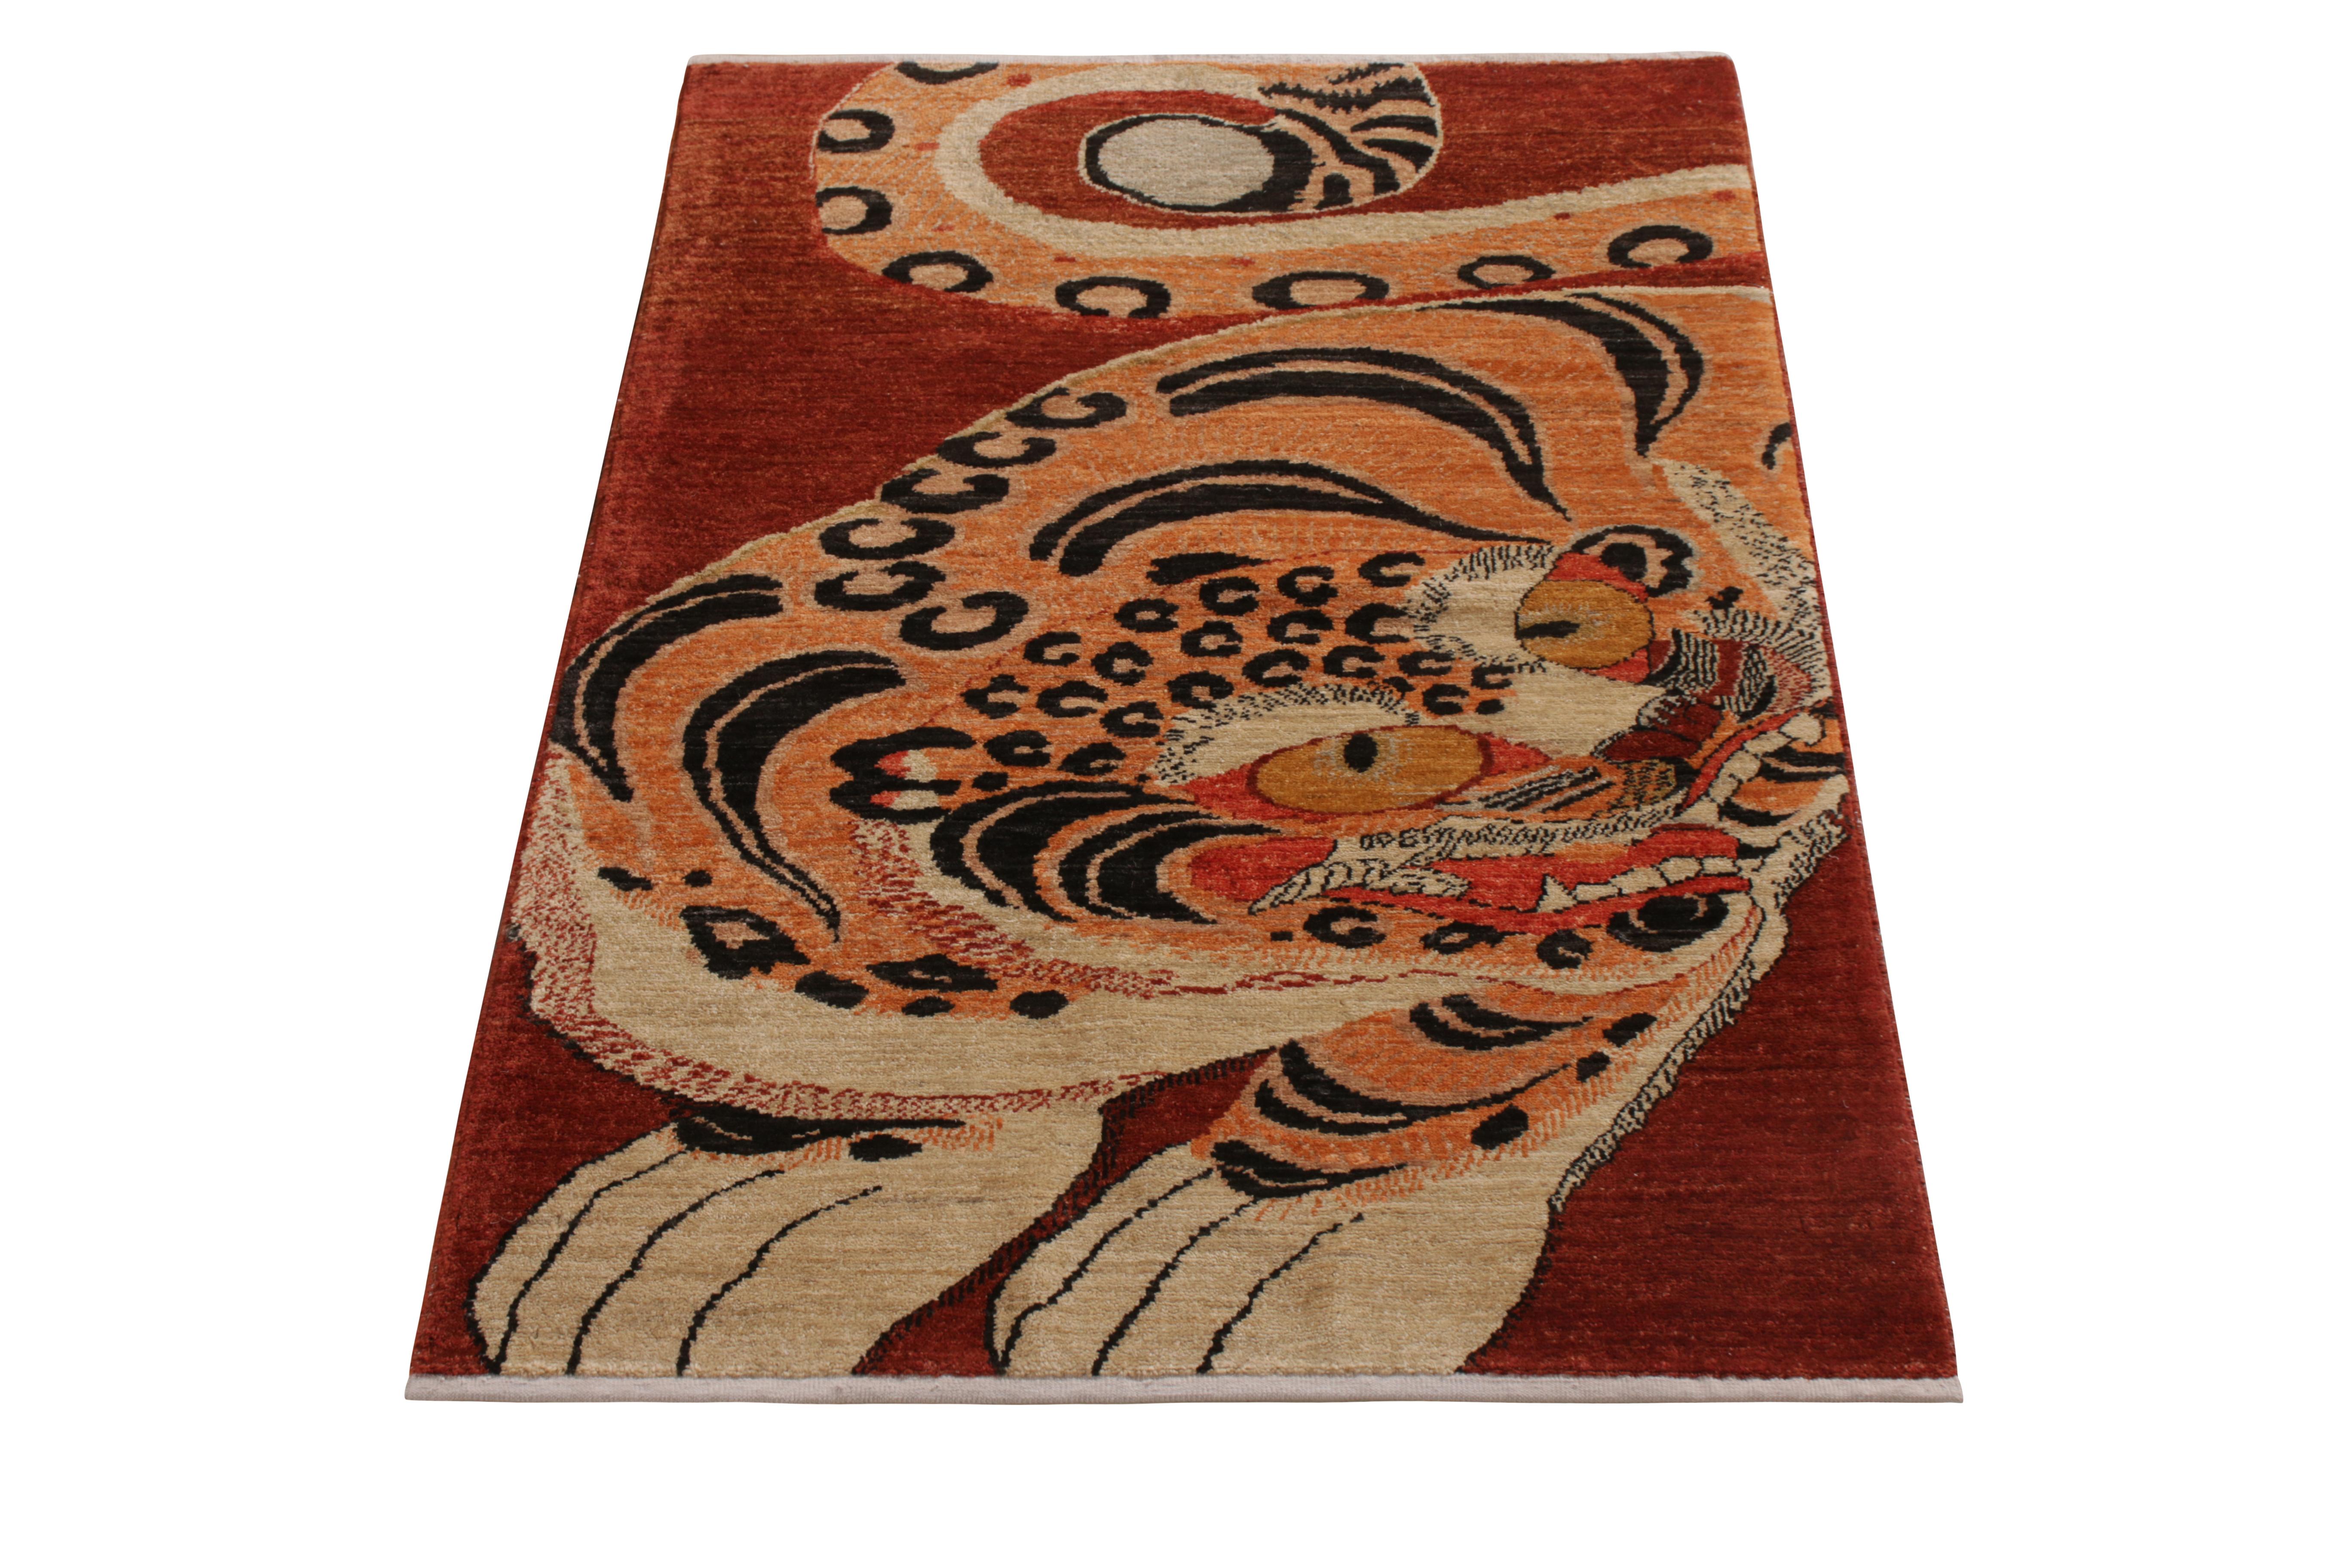 A 3 x 4 ode to celebrated antique Tiger rug styles, from the latest collection by Rug & Kilim. Hand knotted in wool, enjoying warm hues of red and orange playing with a positive-negative black and white in this arresting portrait. Exemplative of the